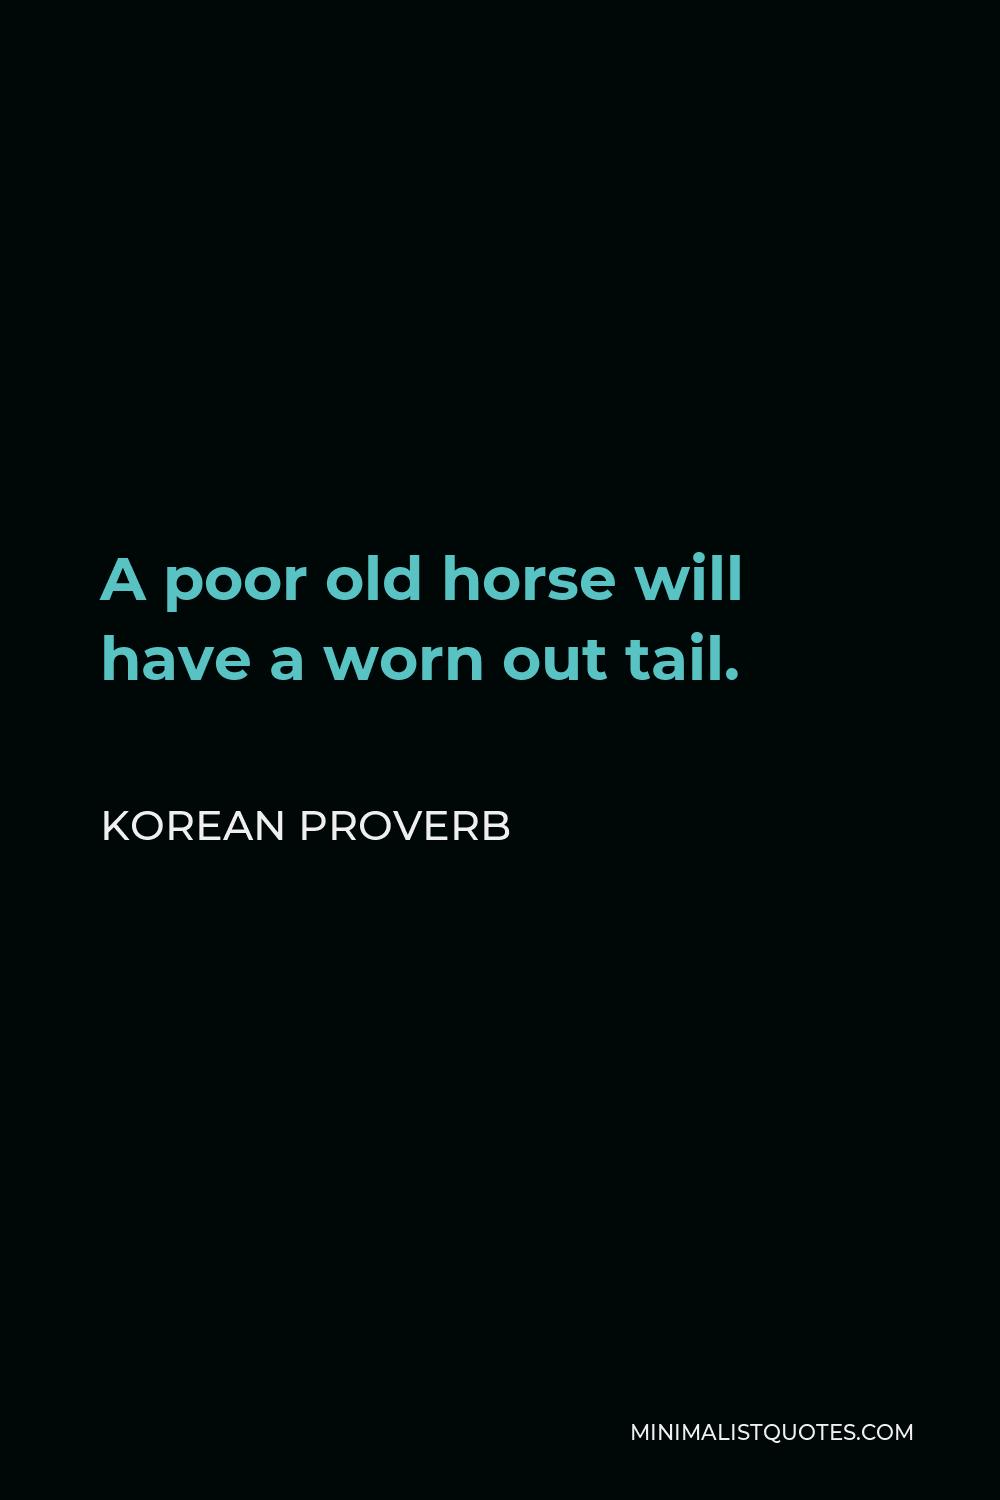 Korean Proverb Quote - A poor old horse will have a worn out tail.